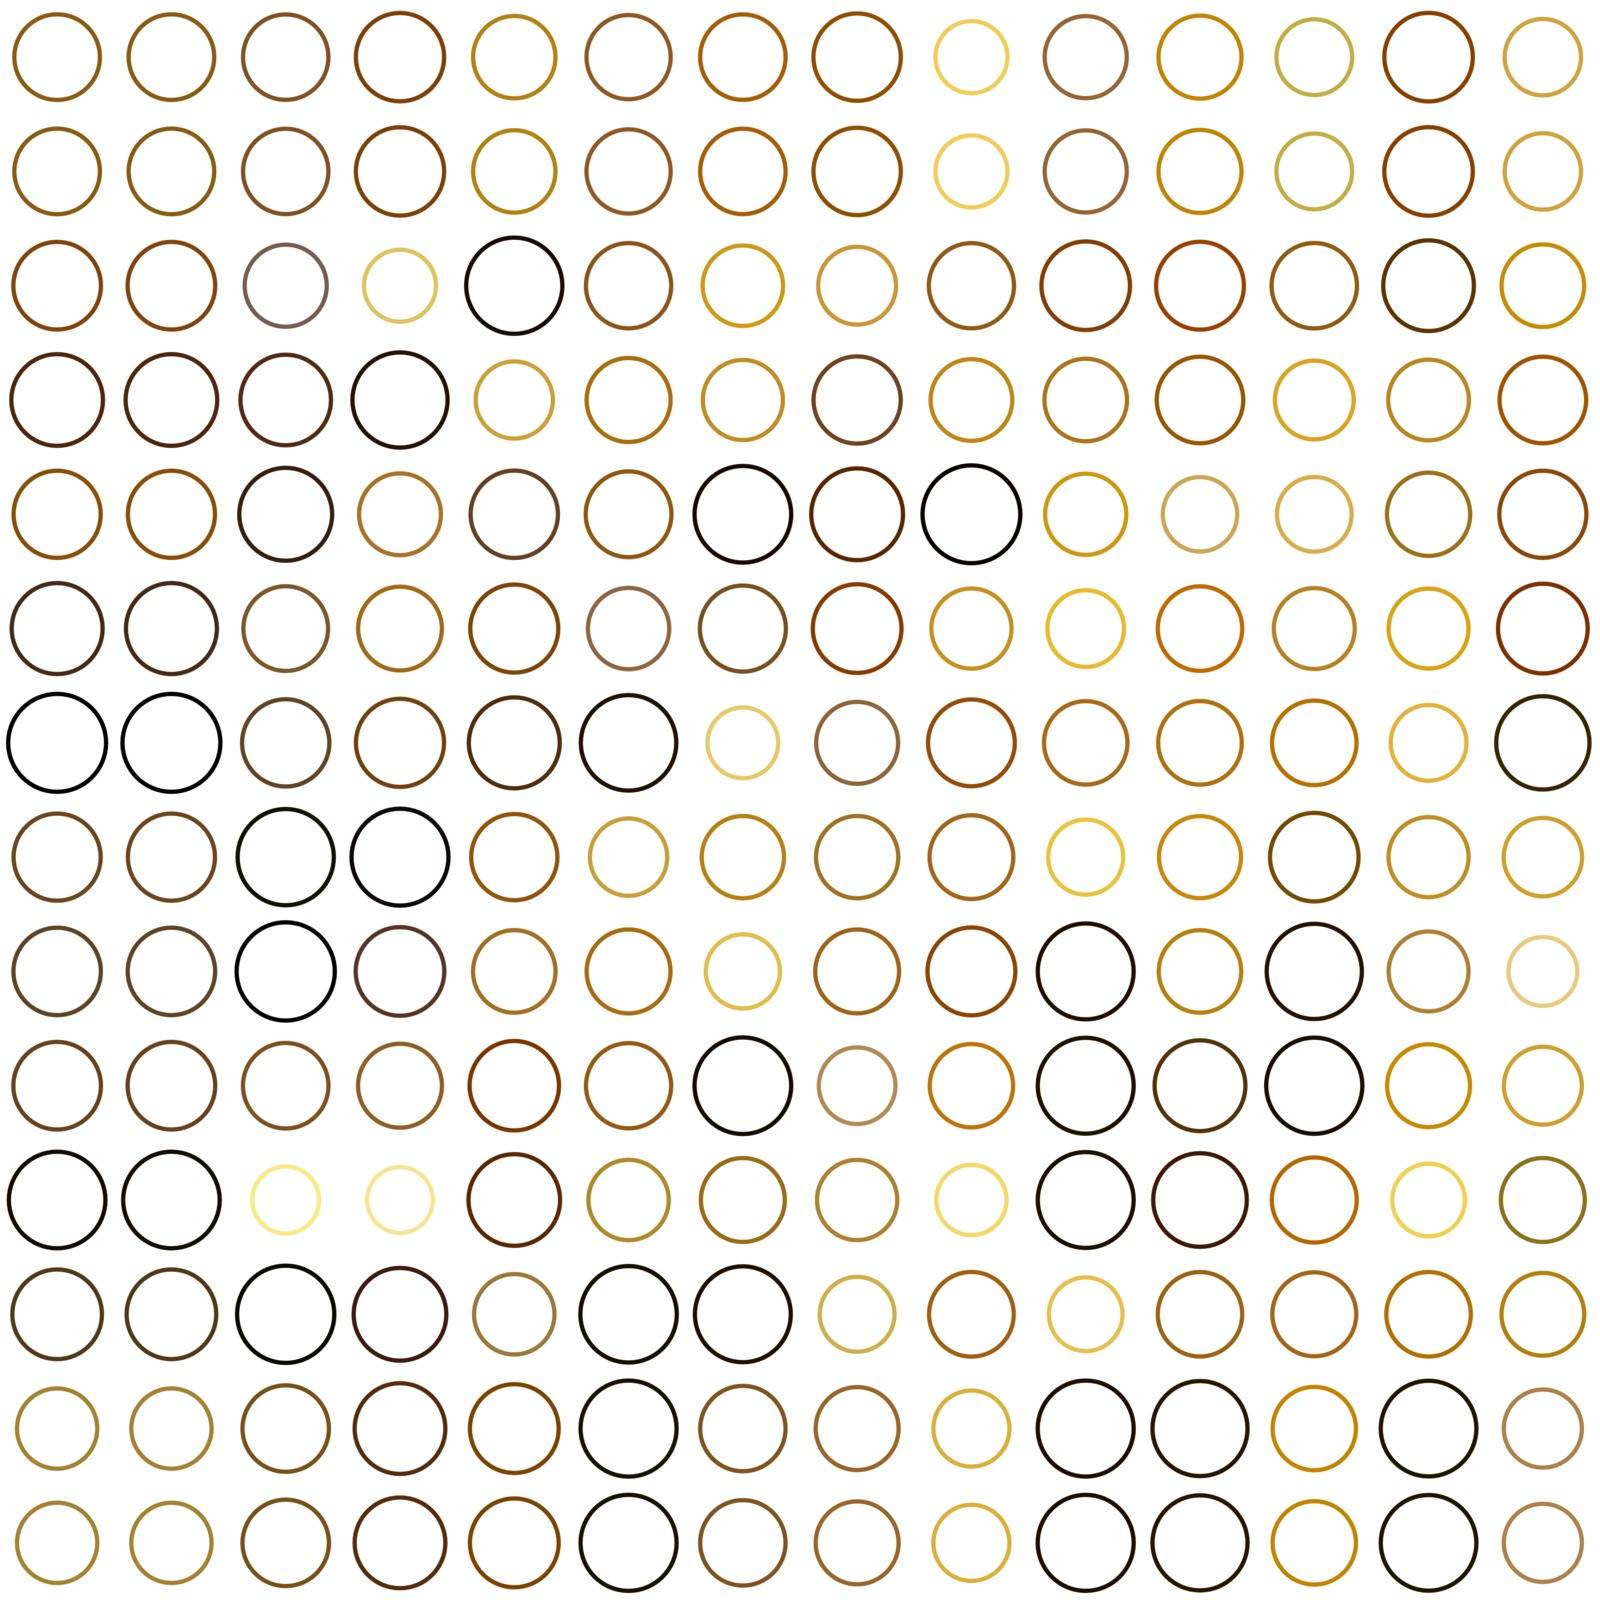 Seamless background made of rings in various sizes and colors ordered in rows. Vector illustration in shades of brown on white background.